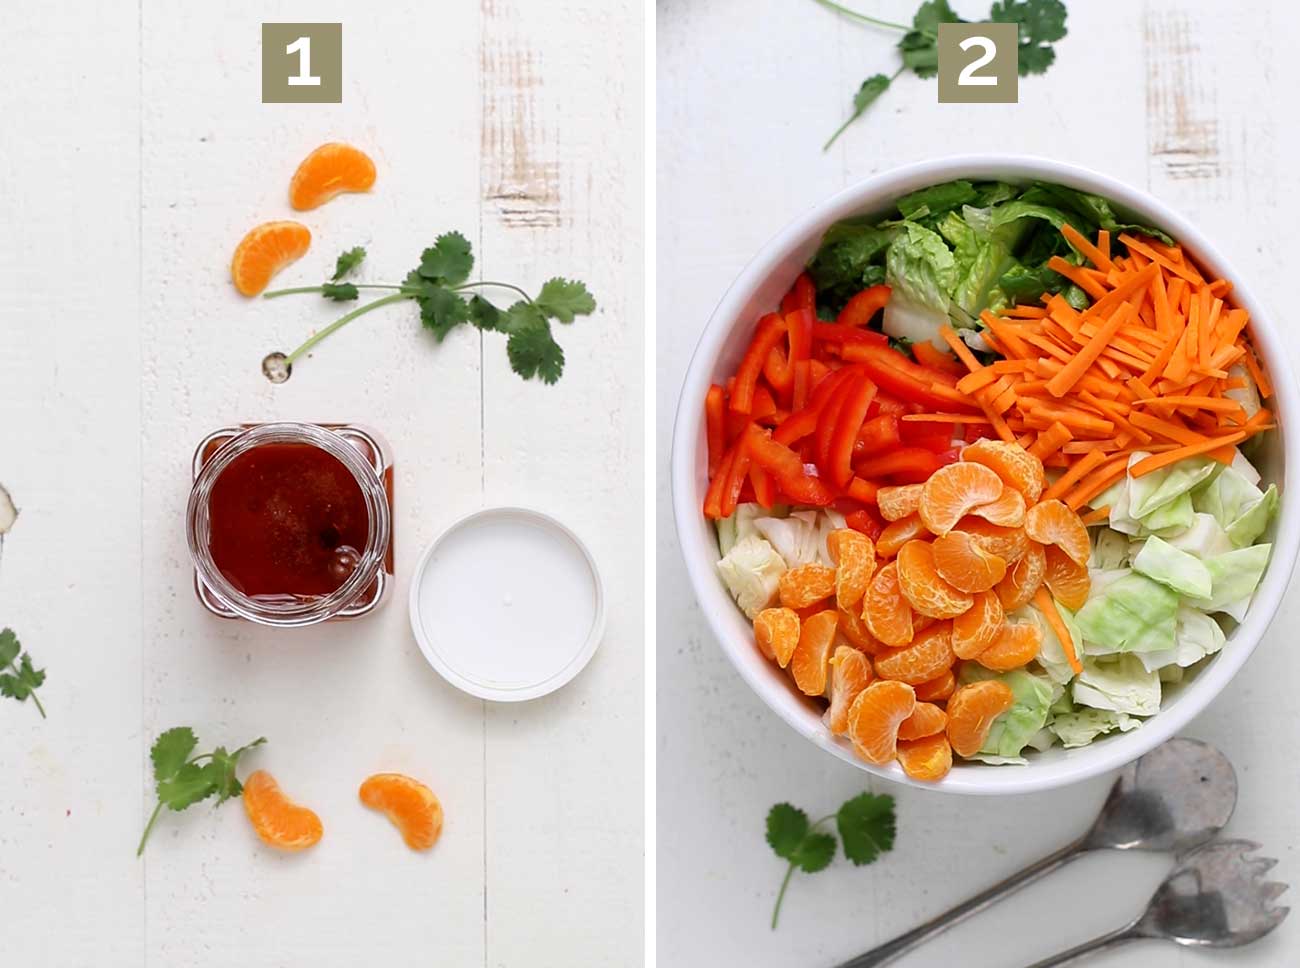 Step 1 shows combining the dressing ingredients and tossing to combine. Step 2 shows layering the veggies in a salad bowl.